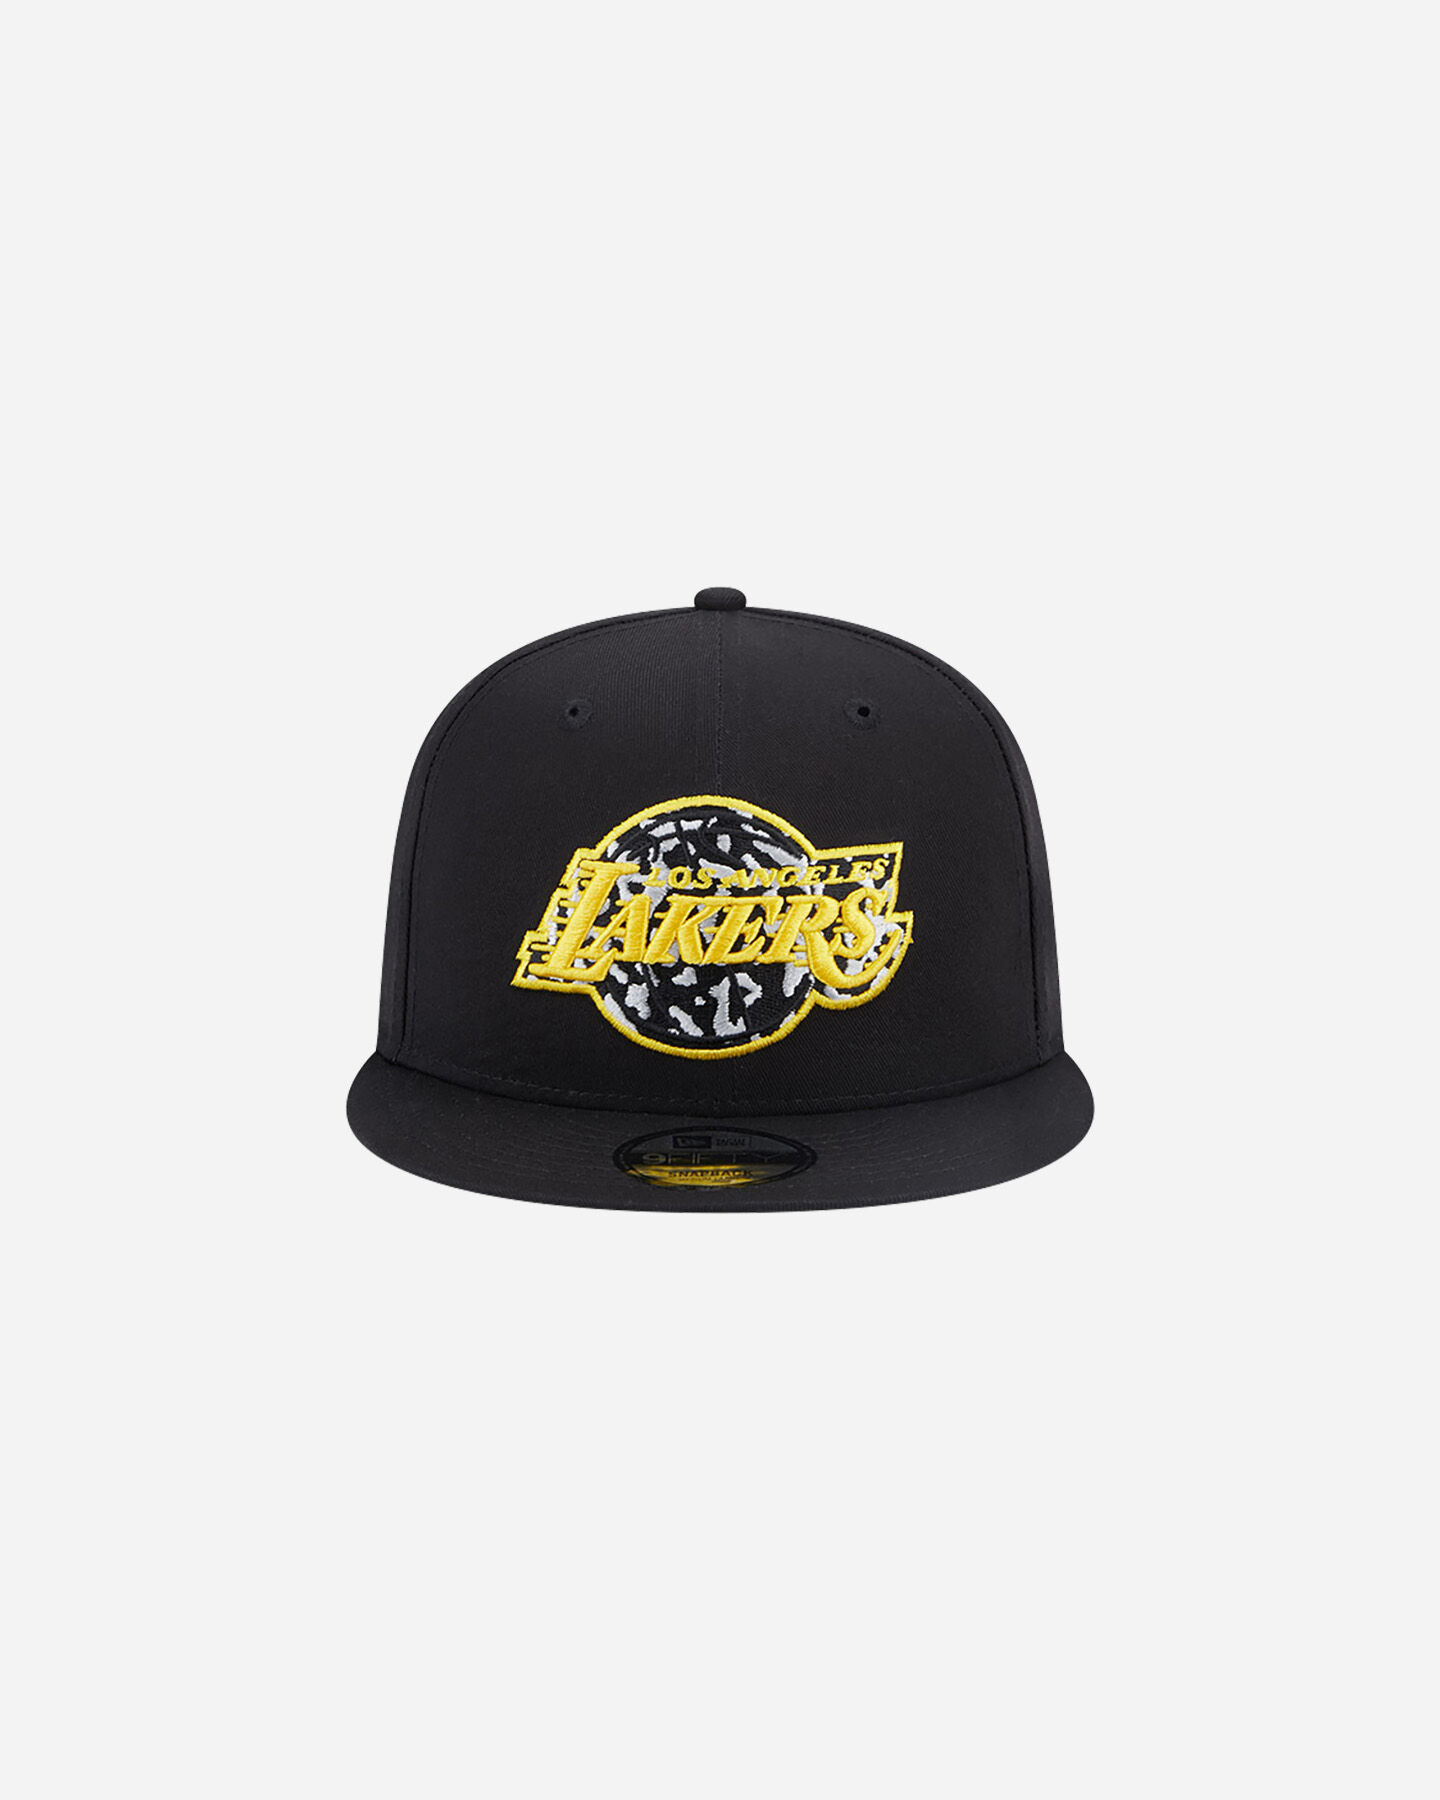  Cappellino NEW ERA 9FIFTY SEASON INFILL LOS ANGELES LAKERS  S5606191|001|SM scatto 1